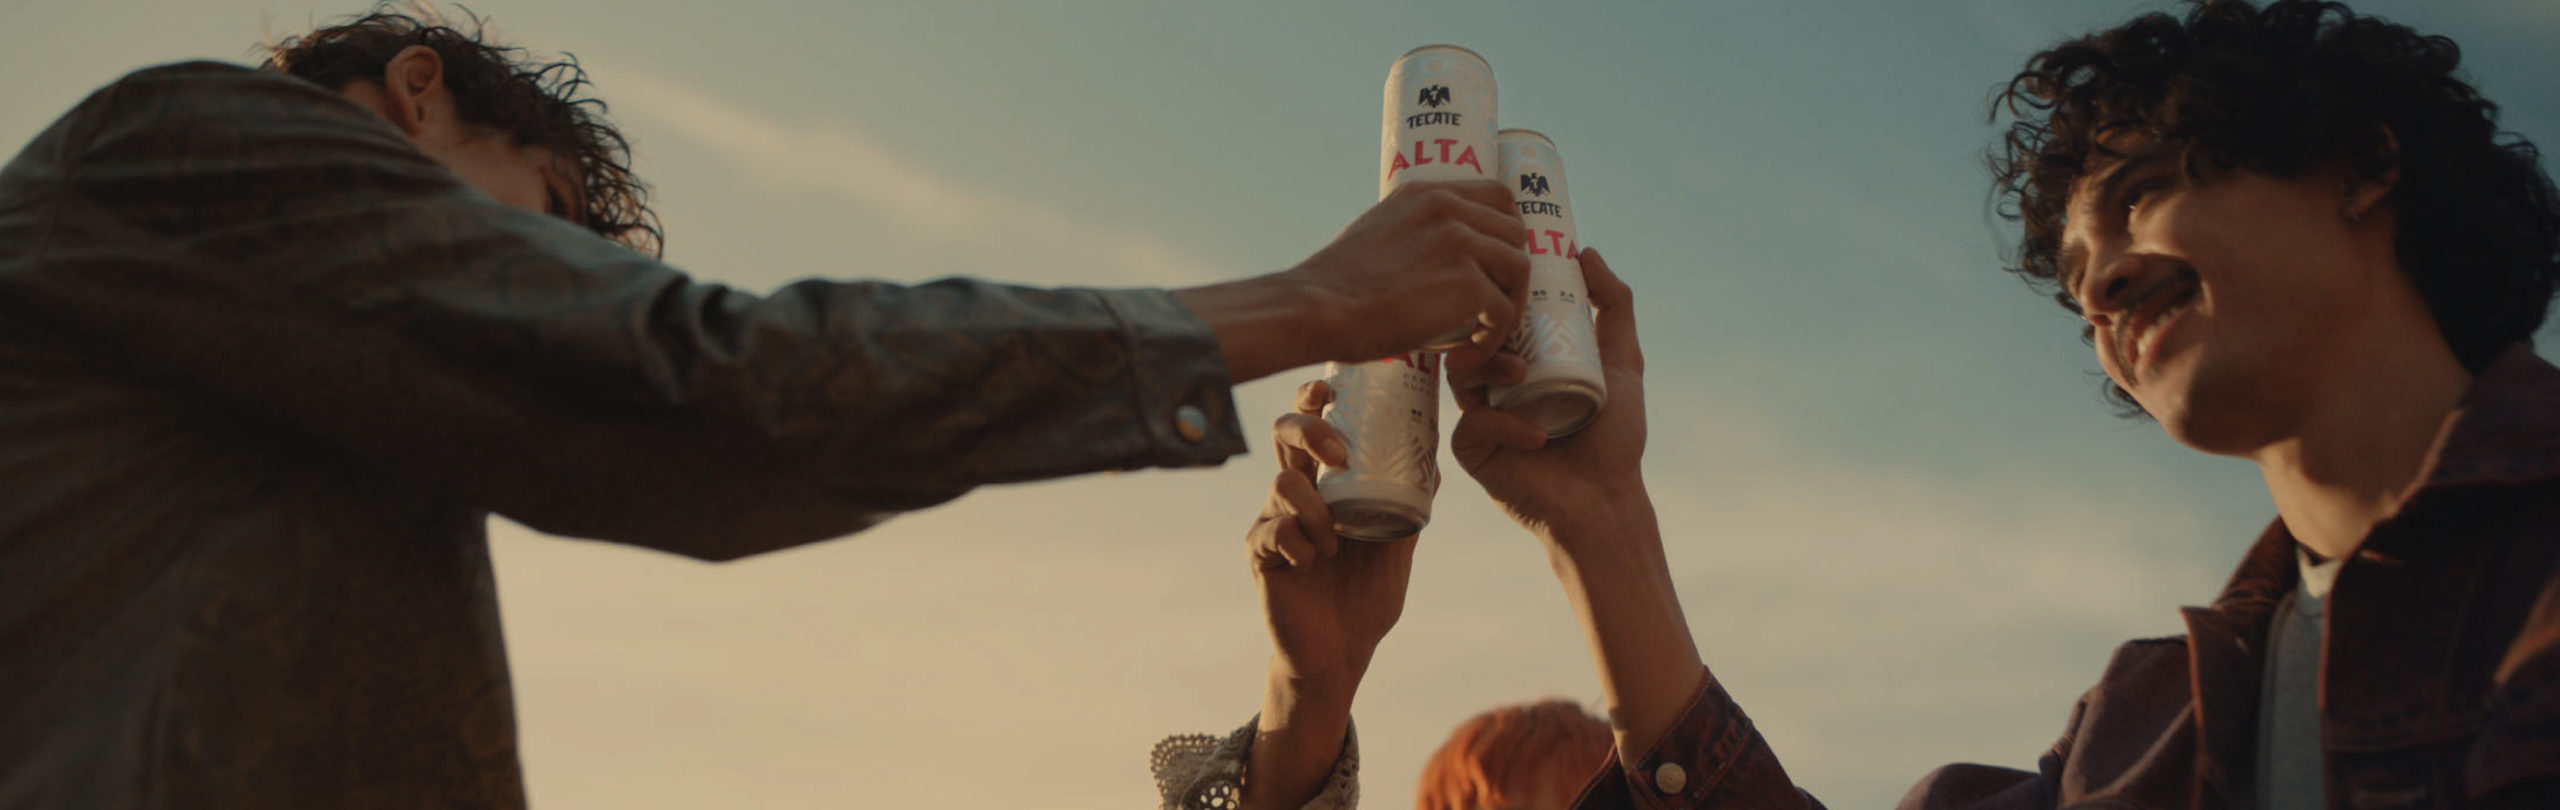 Pearlfisher creates powerful TV commercial and ad campaign for Tecate Alta